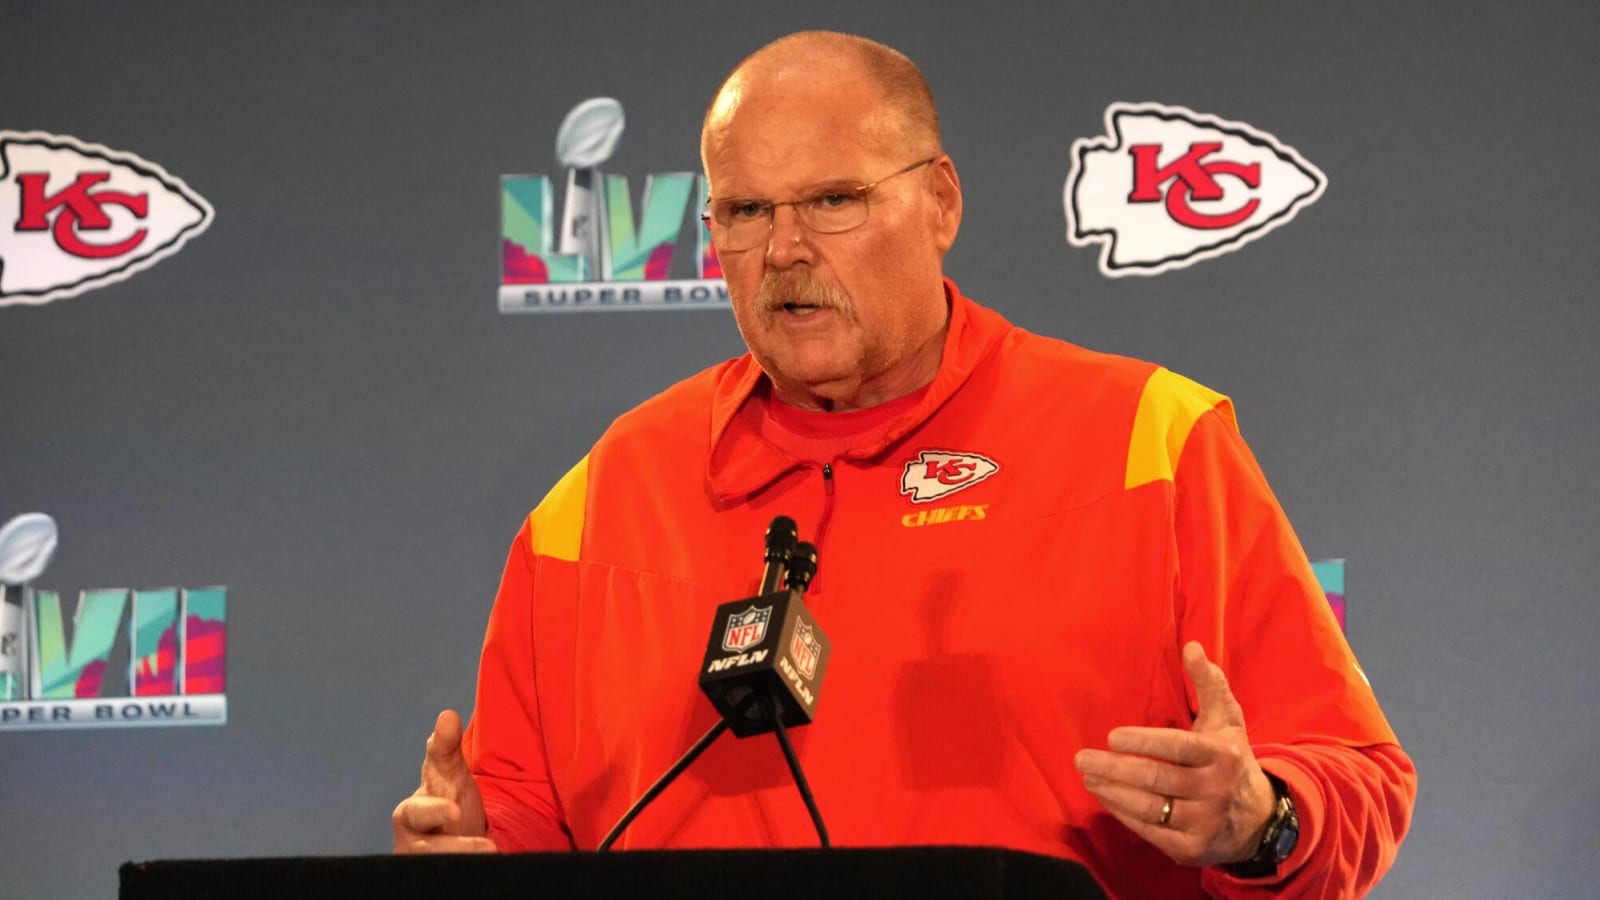 Andy Reid says he has decision to make on future after Super Bowl